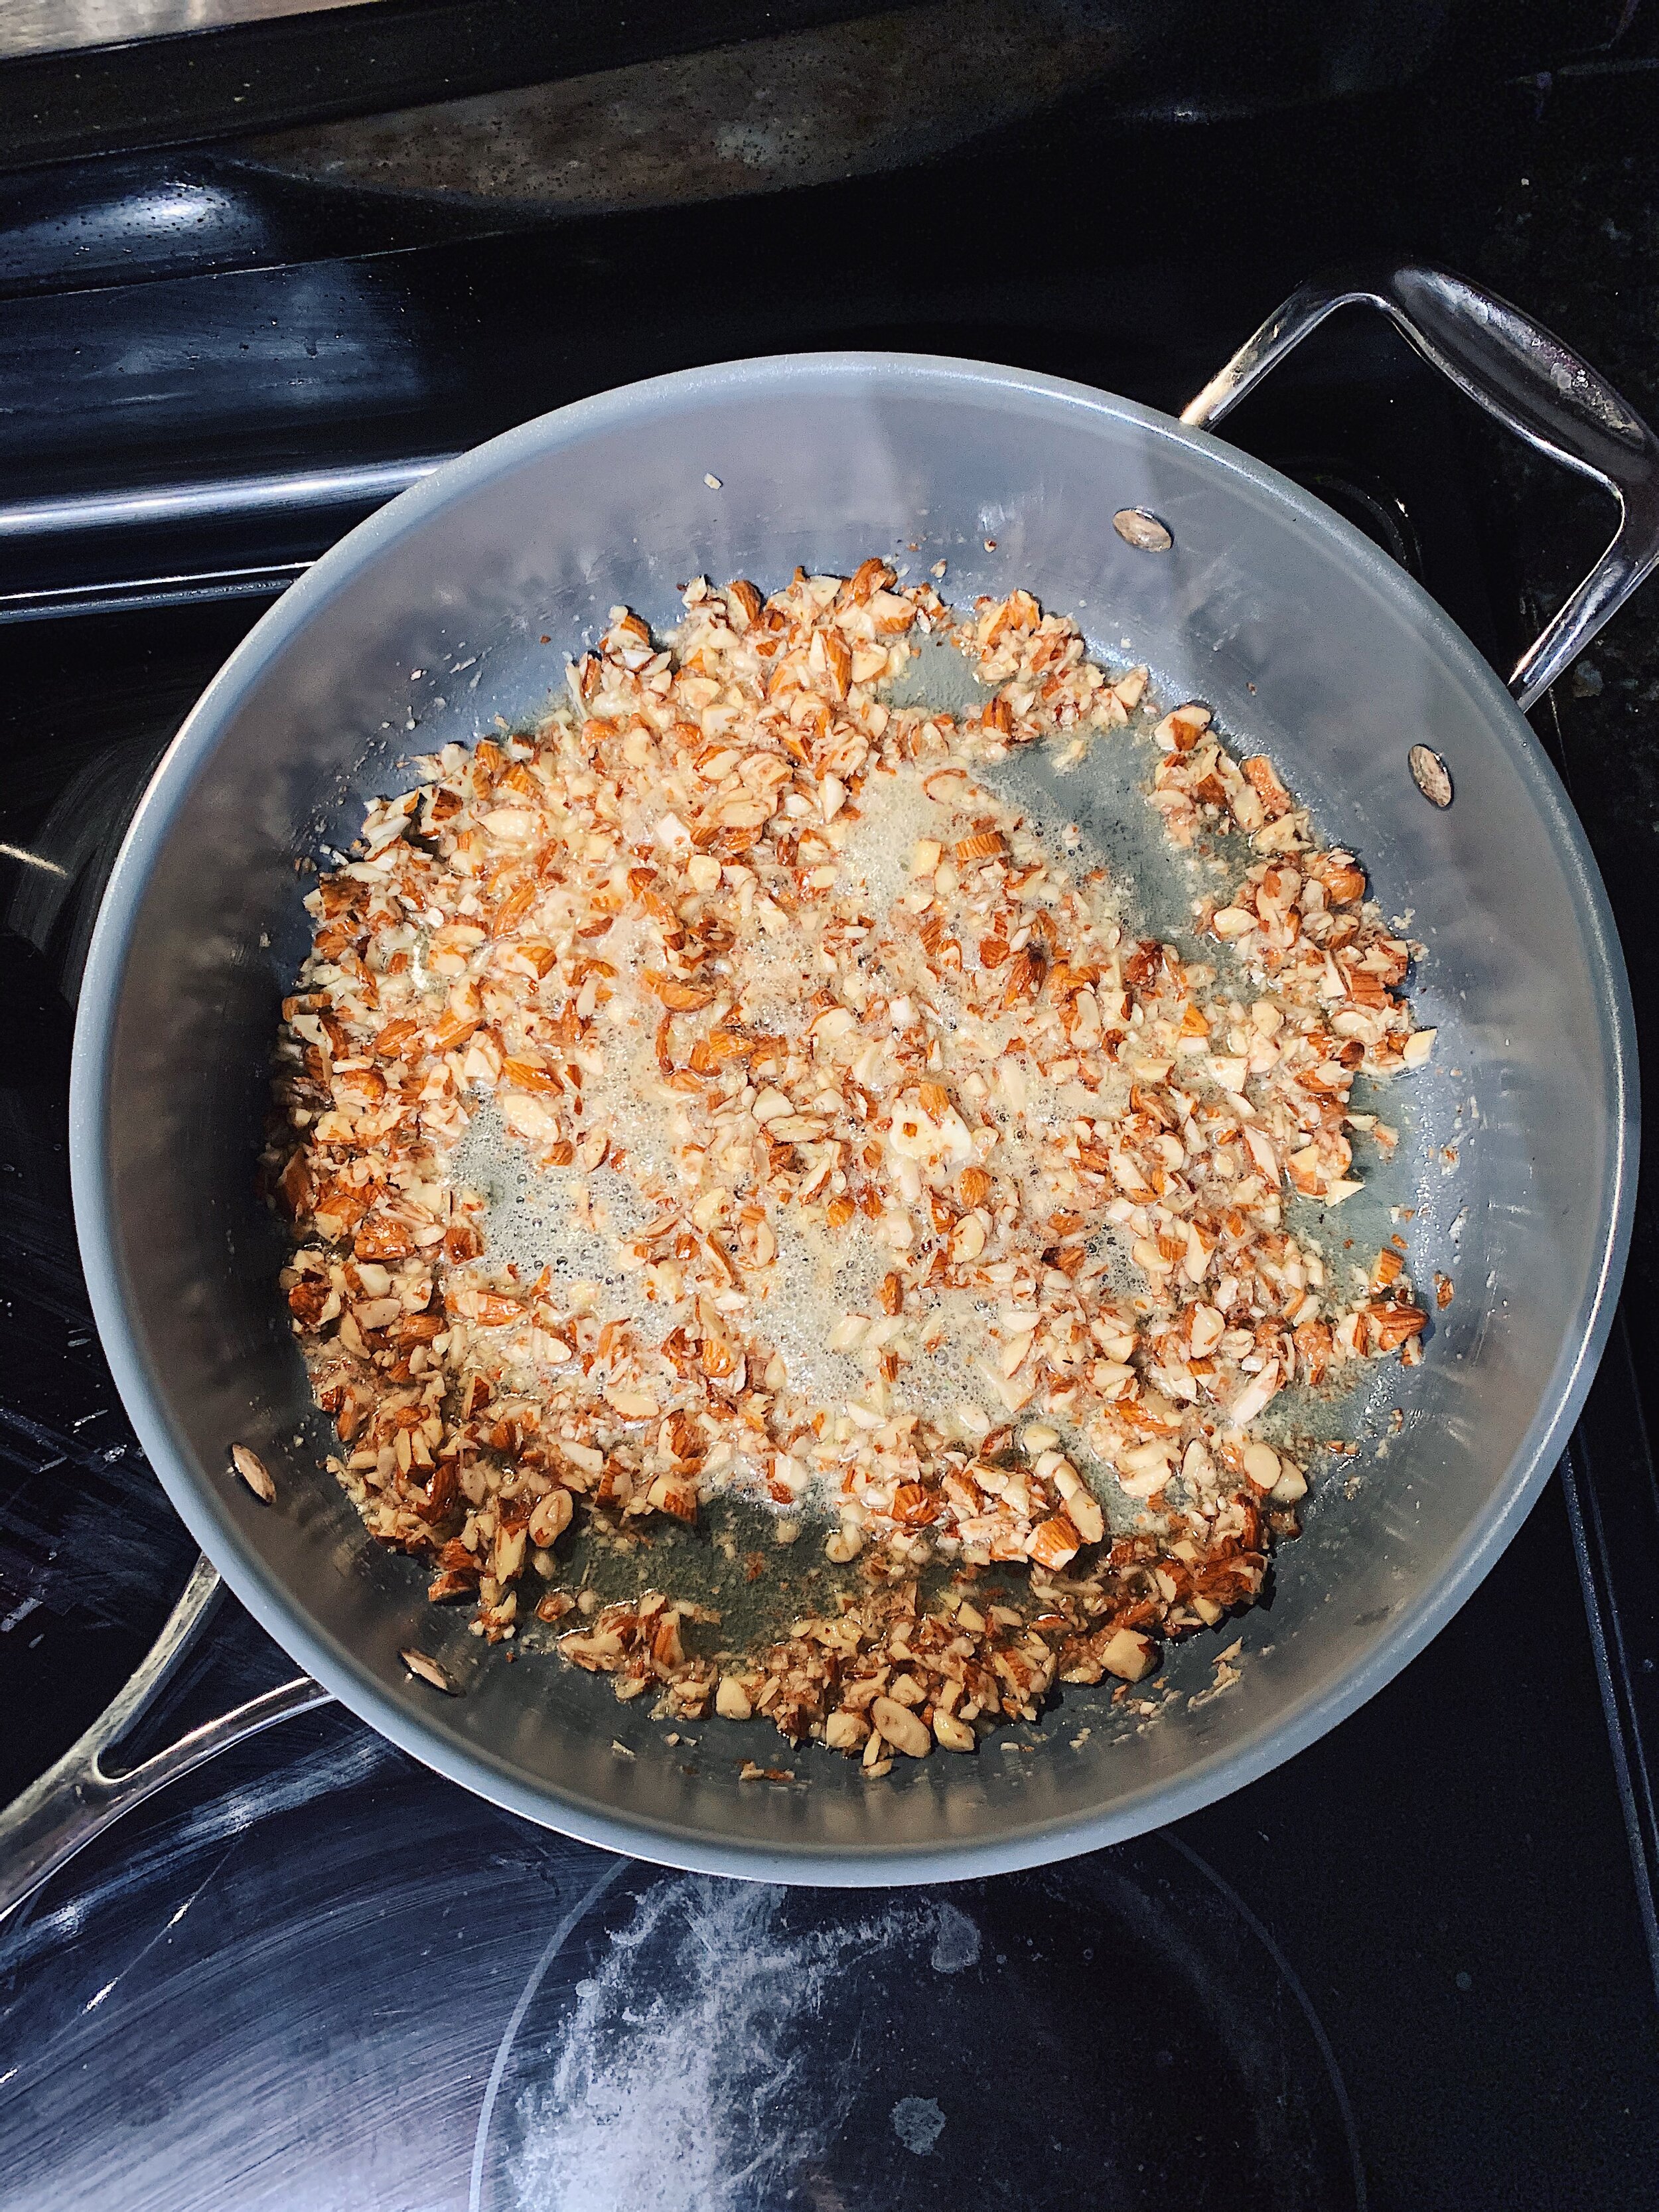 buttered-turmeric-rice-crushed-almonds-alison-roman-nuts.jpg